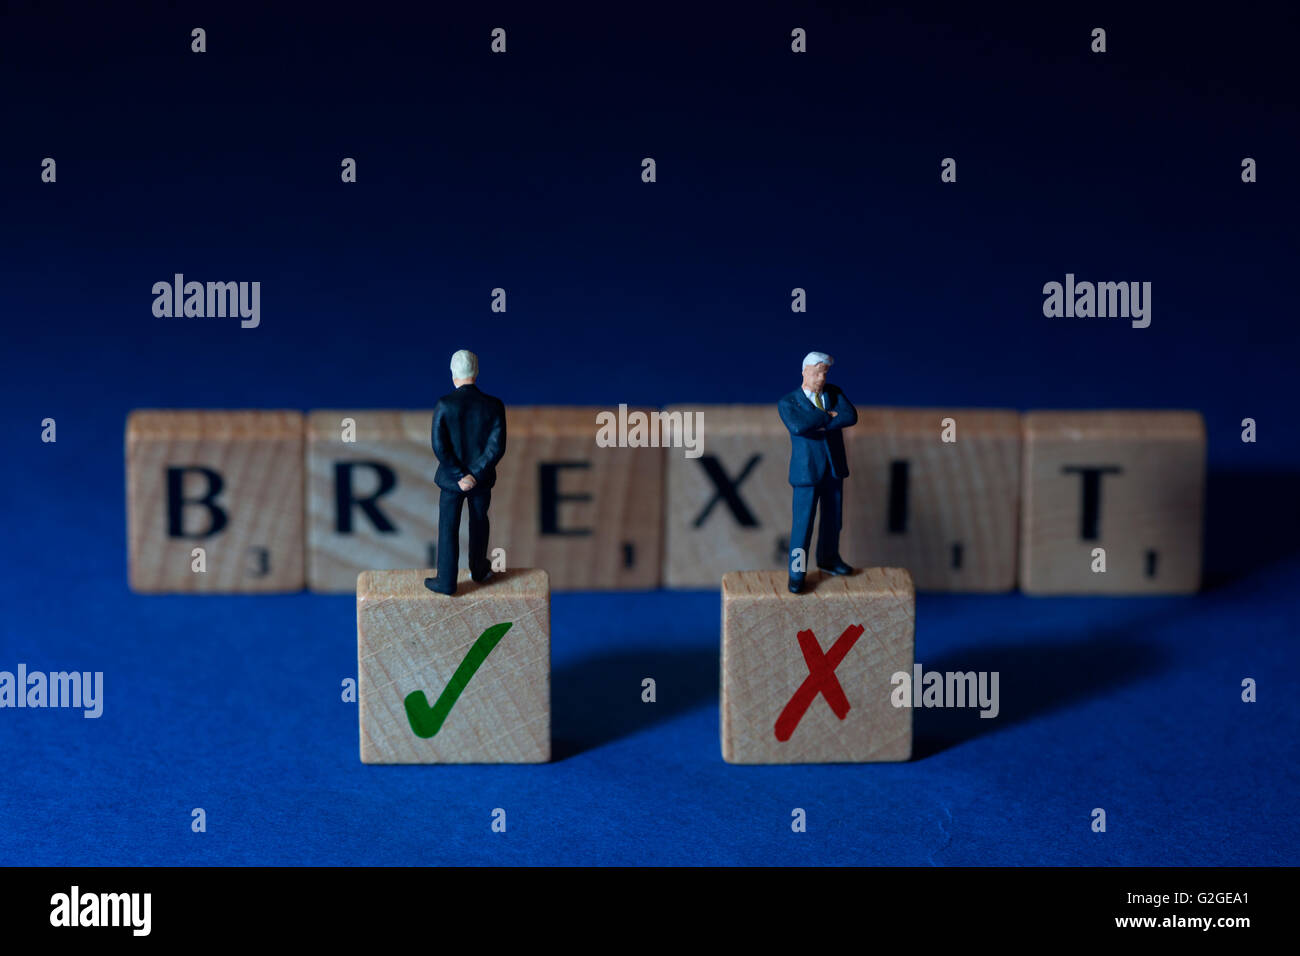 Brexit spelled out with undecided businessman Stock Photo